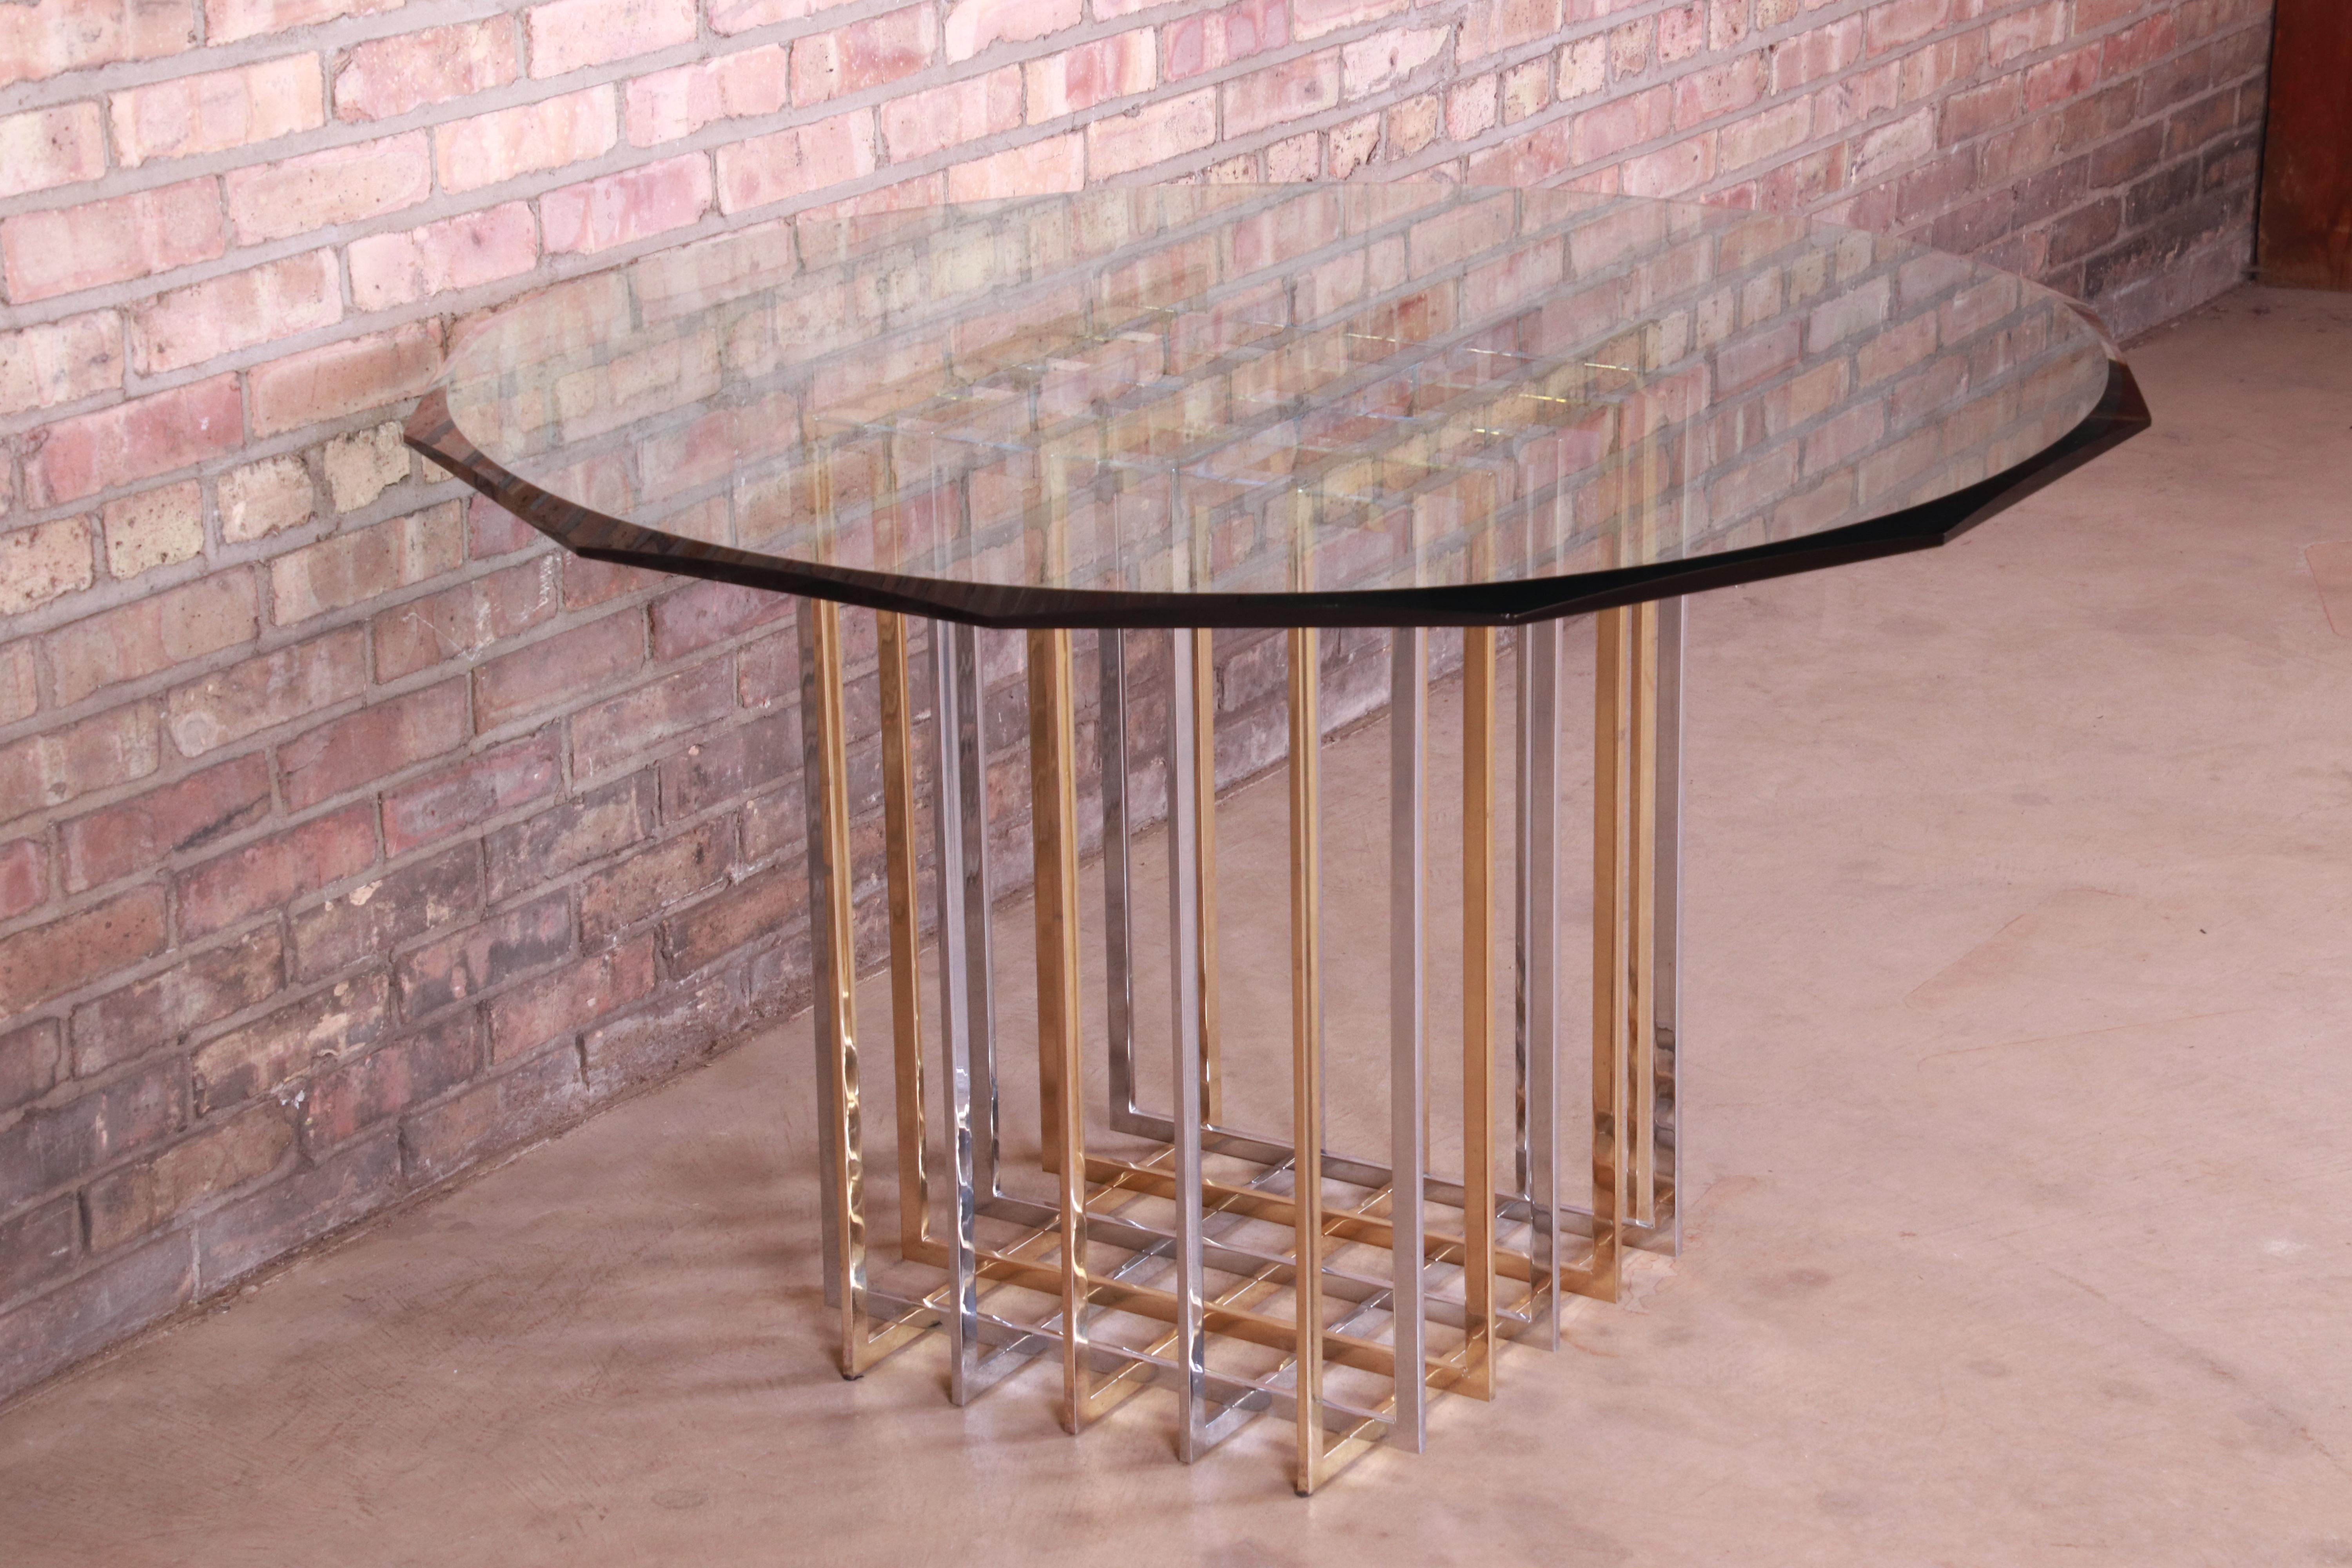 Beveled Pierre Cardin Hollywood Regency Dining Table in Brass, Nickel, and Glass, 1970s